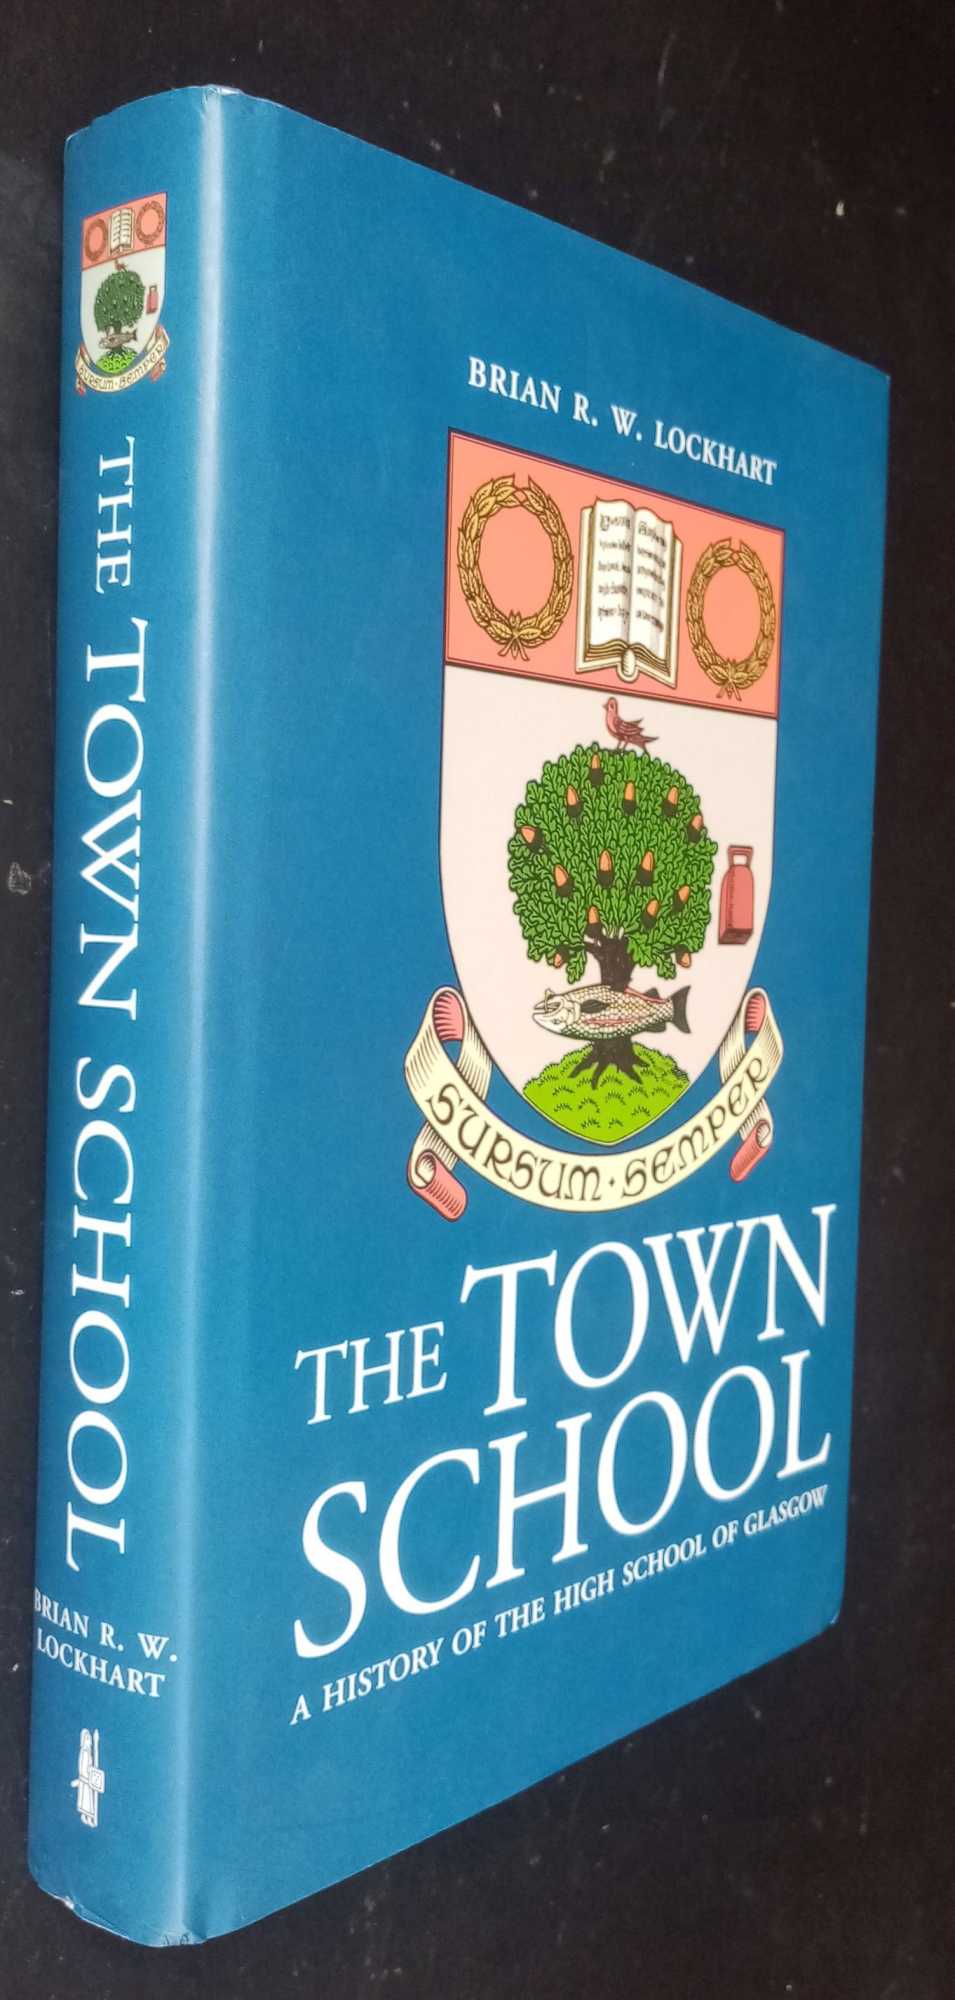 Brian Lockhart - The Town School: A History of the High School of Glasgow  